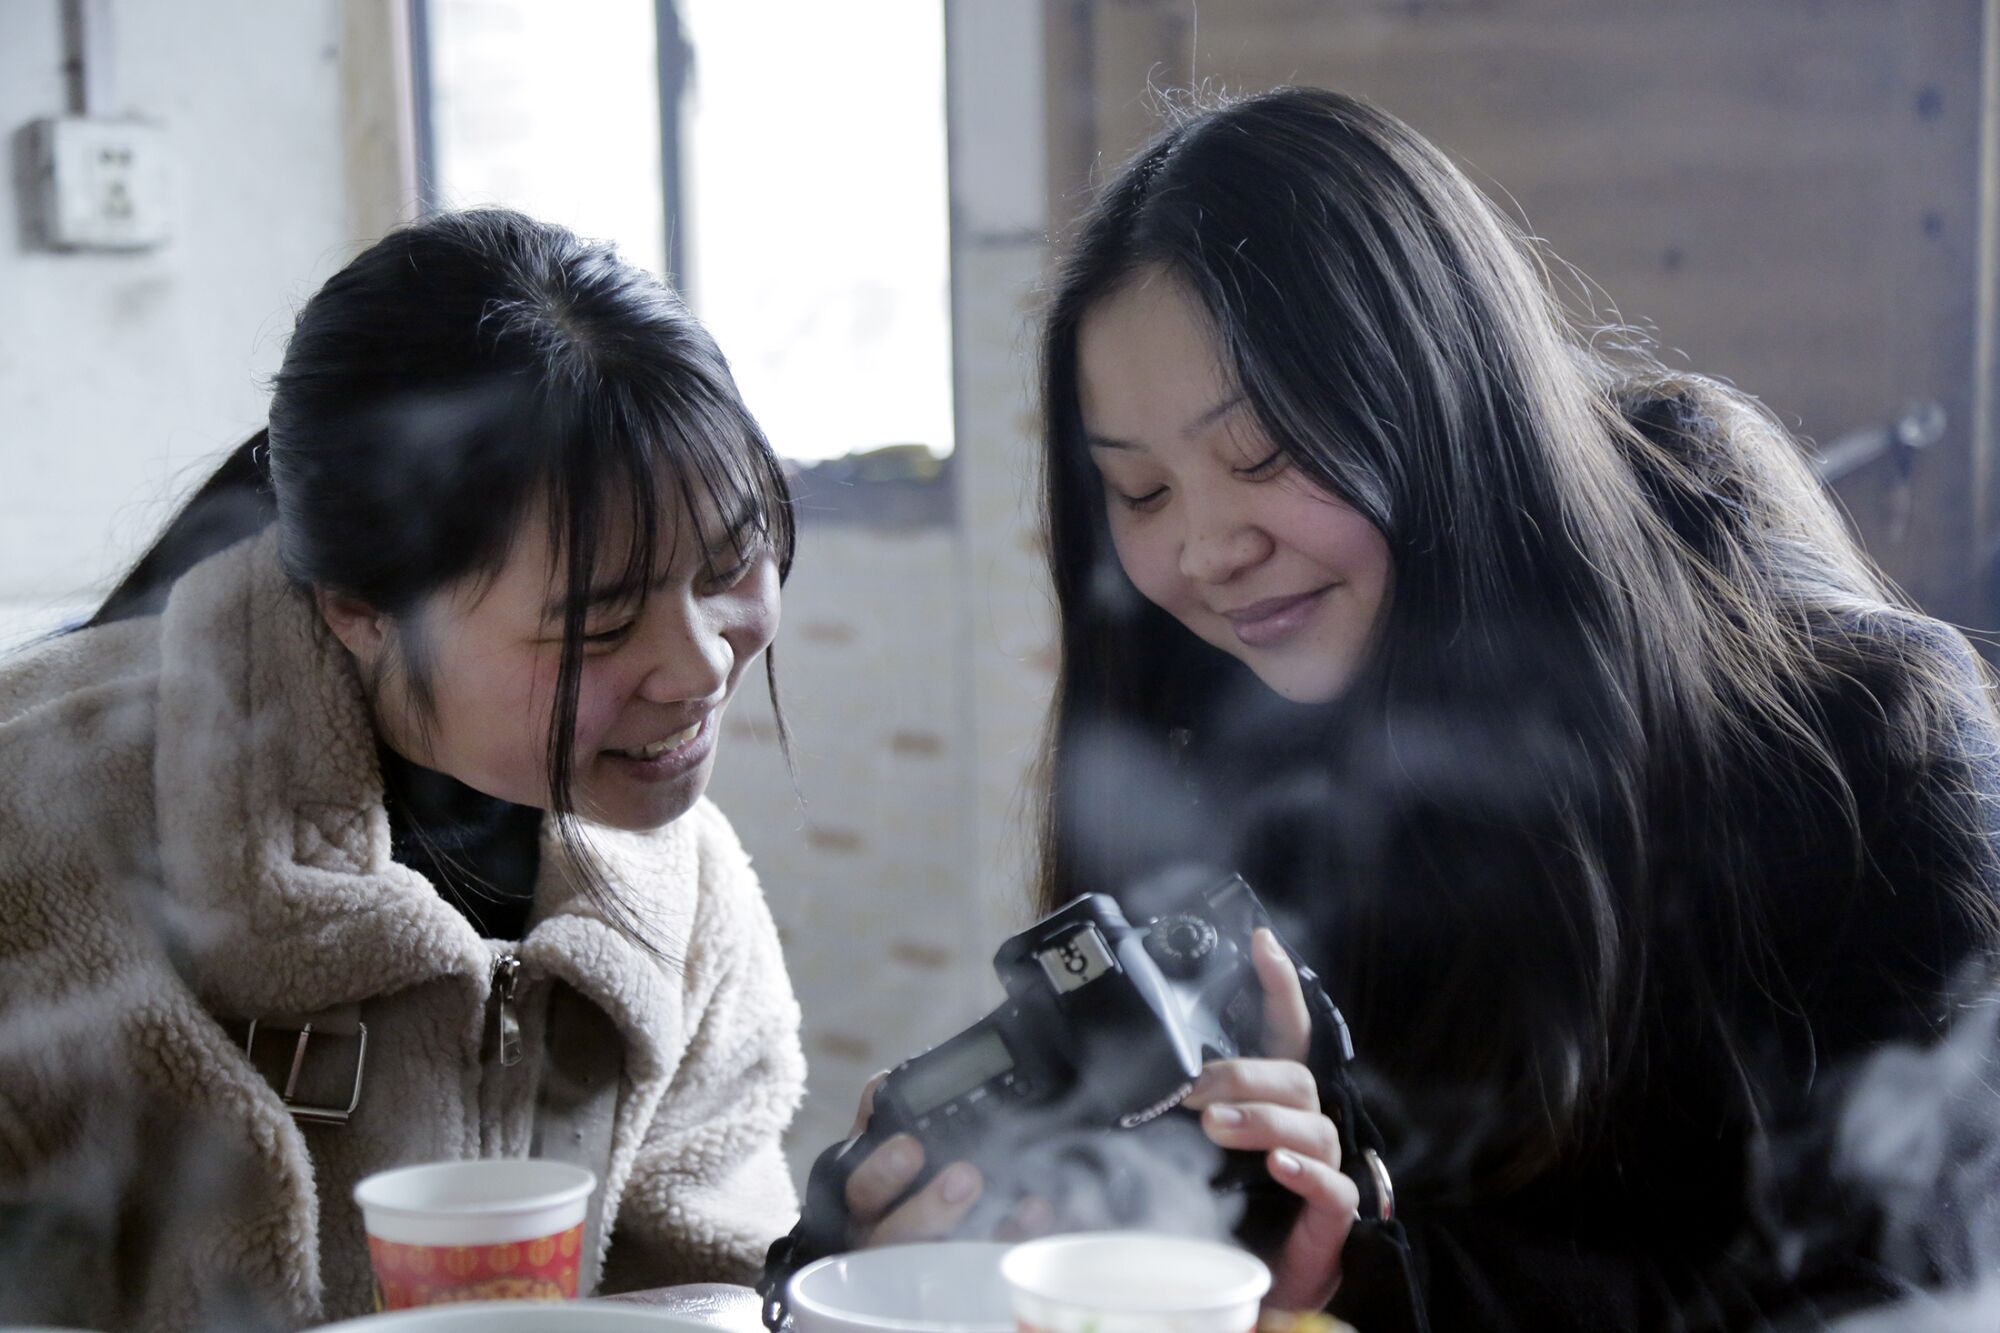 Esther Frederick shows her identical twin, Zeng Shuangjie, photos she took with her camera. Esther is interested in photography, art, baking and fashion, while Shuangjie likes badminton, pingpong, music and writing Chinese characters. The girls were separated when they were toddlers.